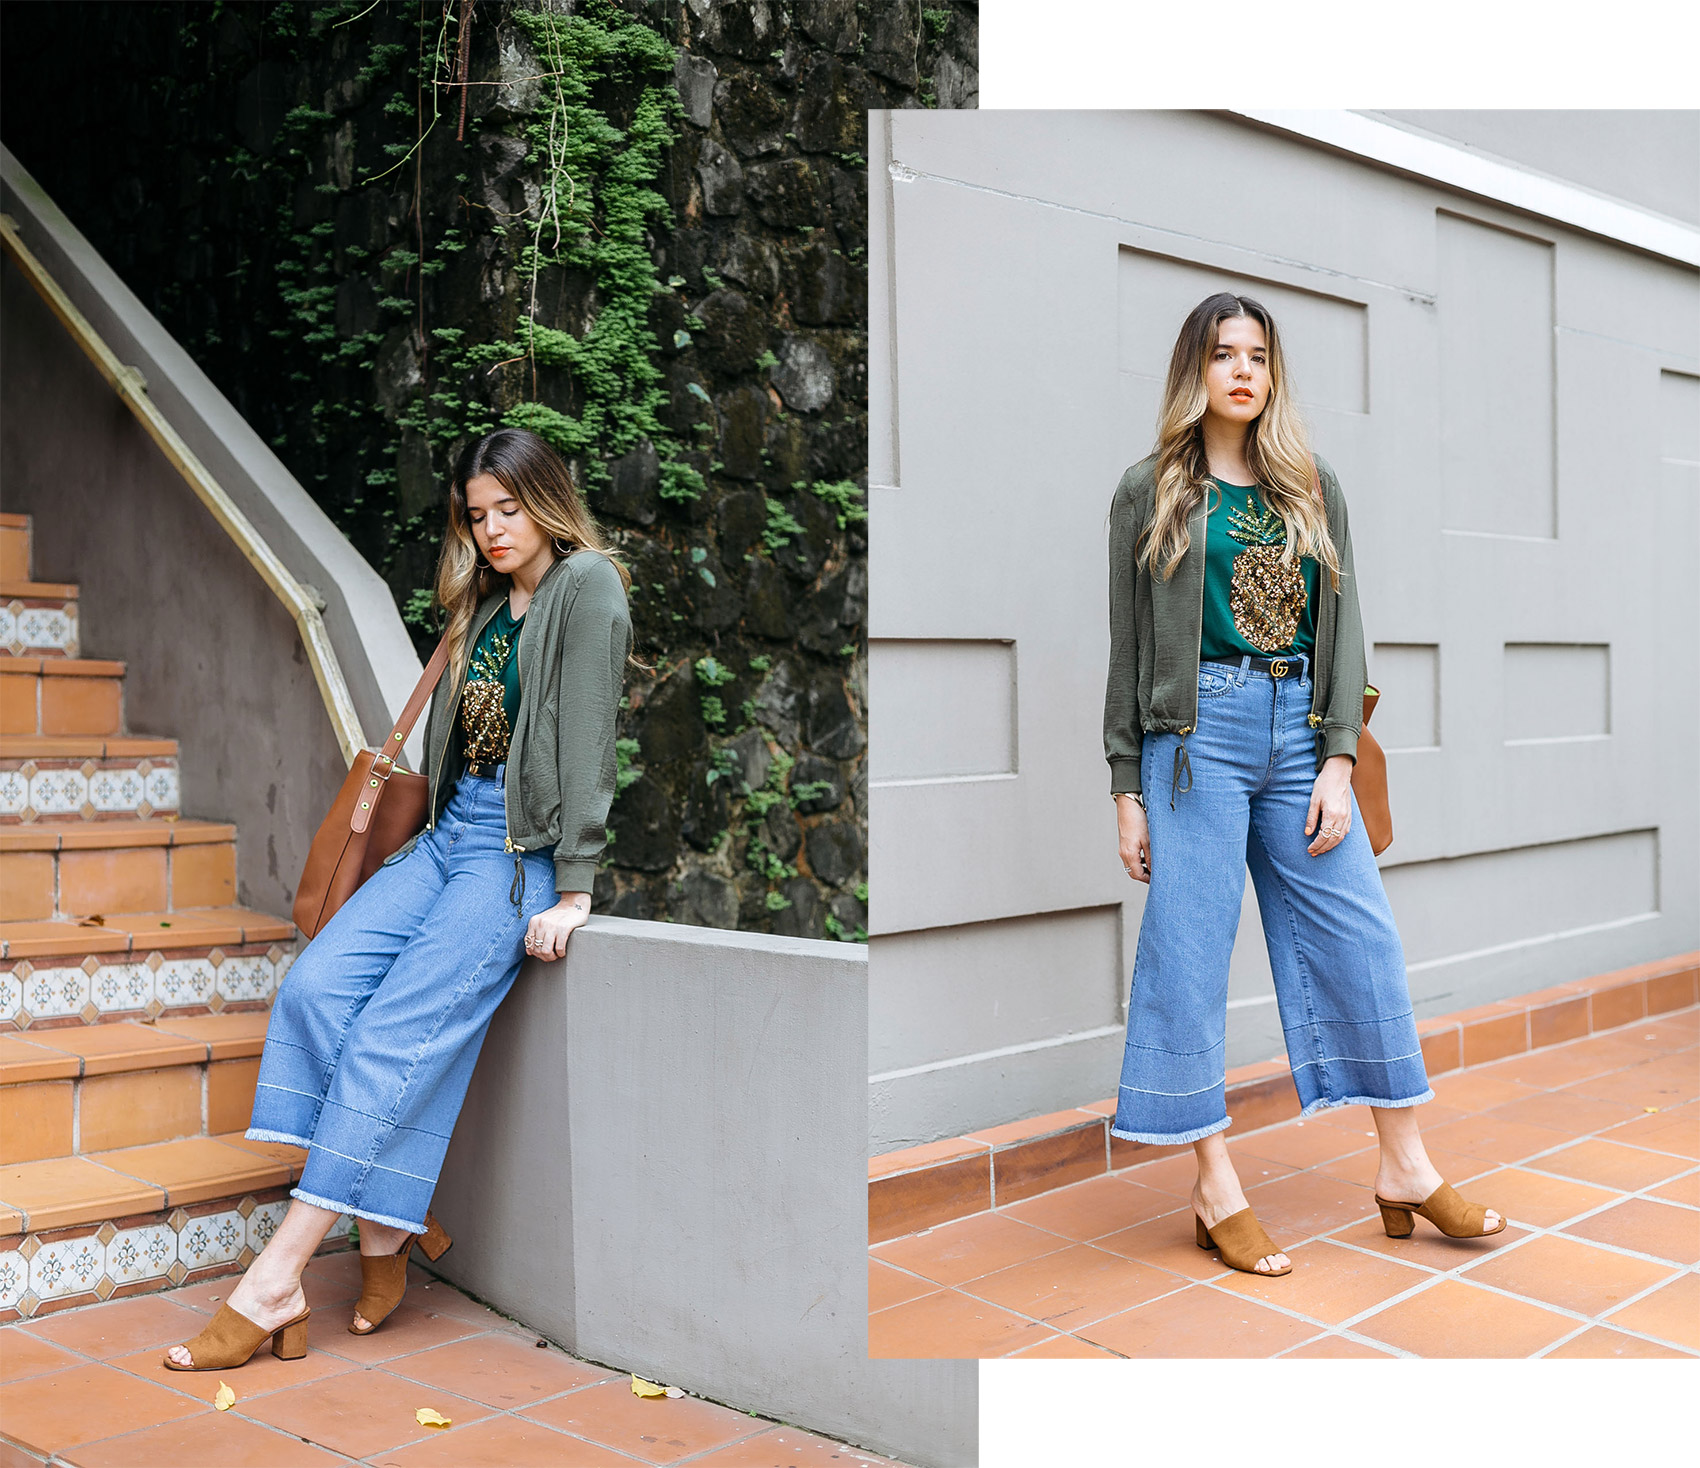 Maristella wearing denim culottes with brown suede Zara mules, satin bomber jacket and sequin pineapple t-shirt from H&M